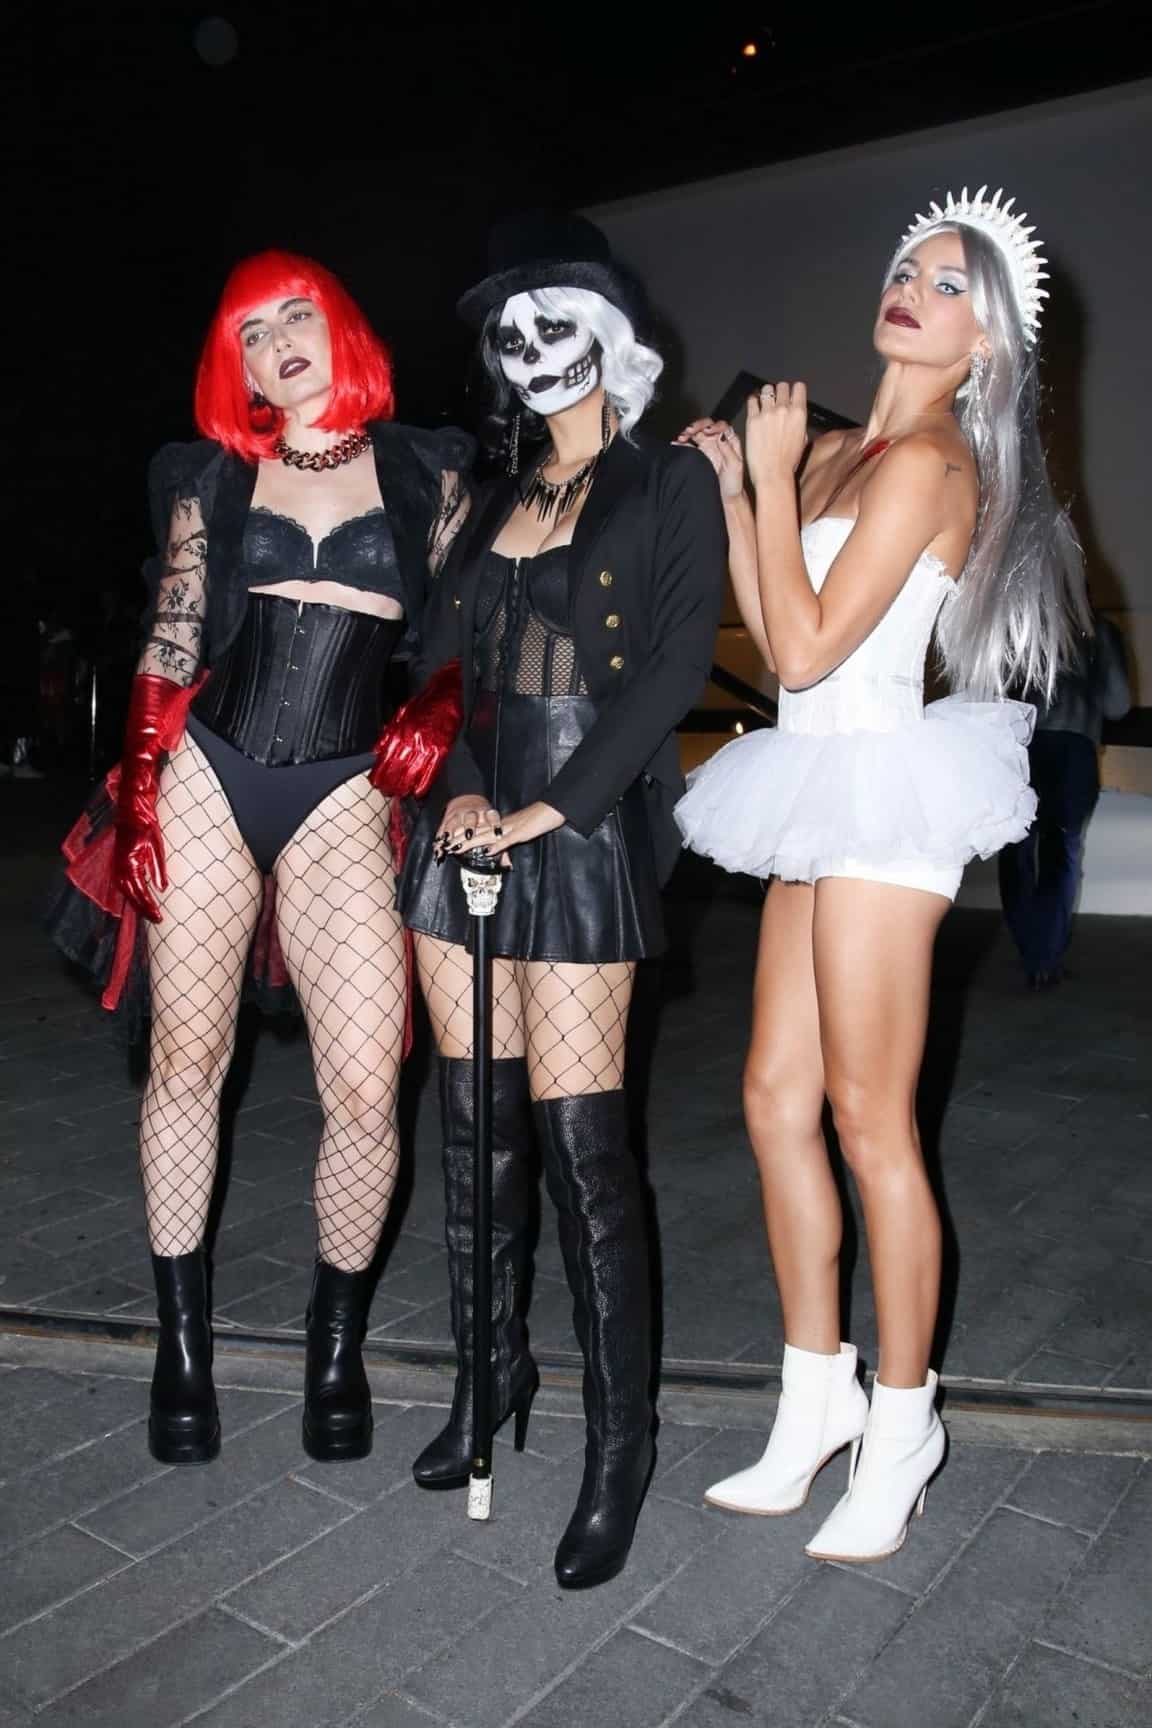 Victoria Justice Arrives as Seductive Skeleton at CarnEvil Halloween Party